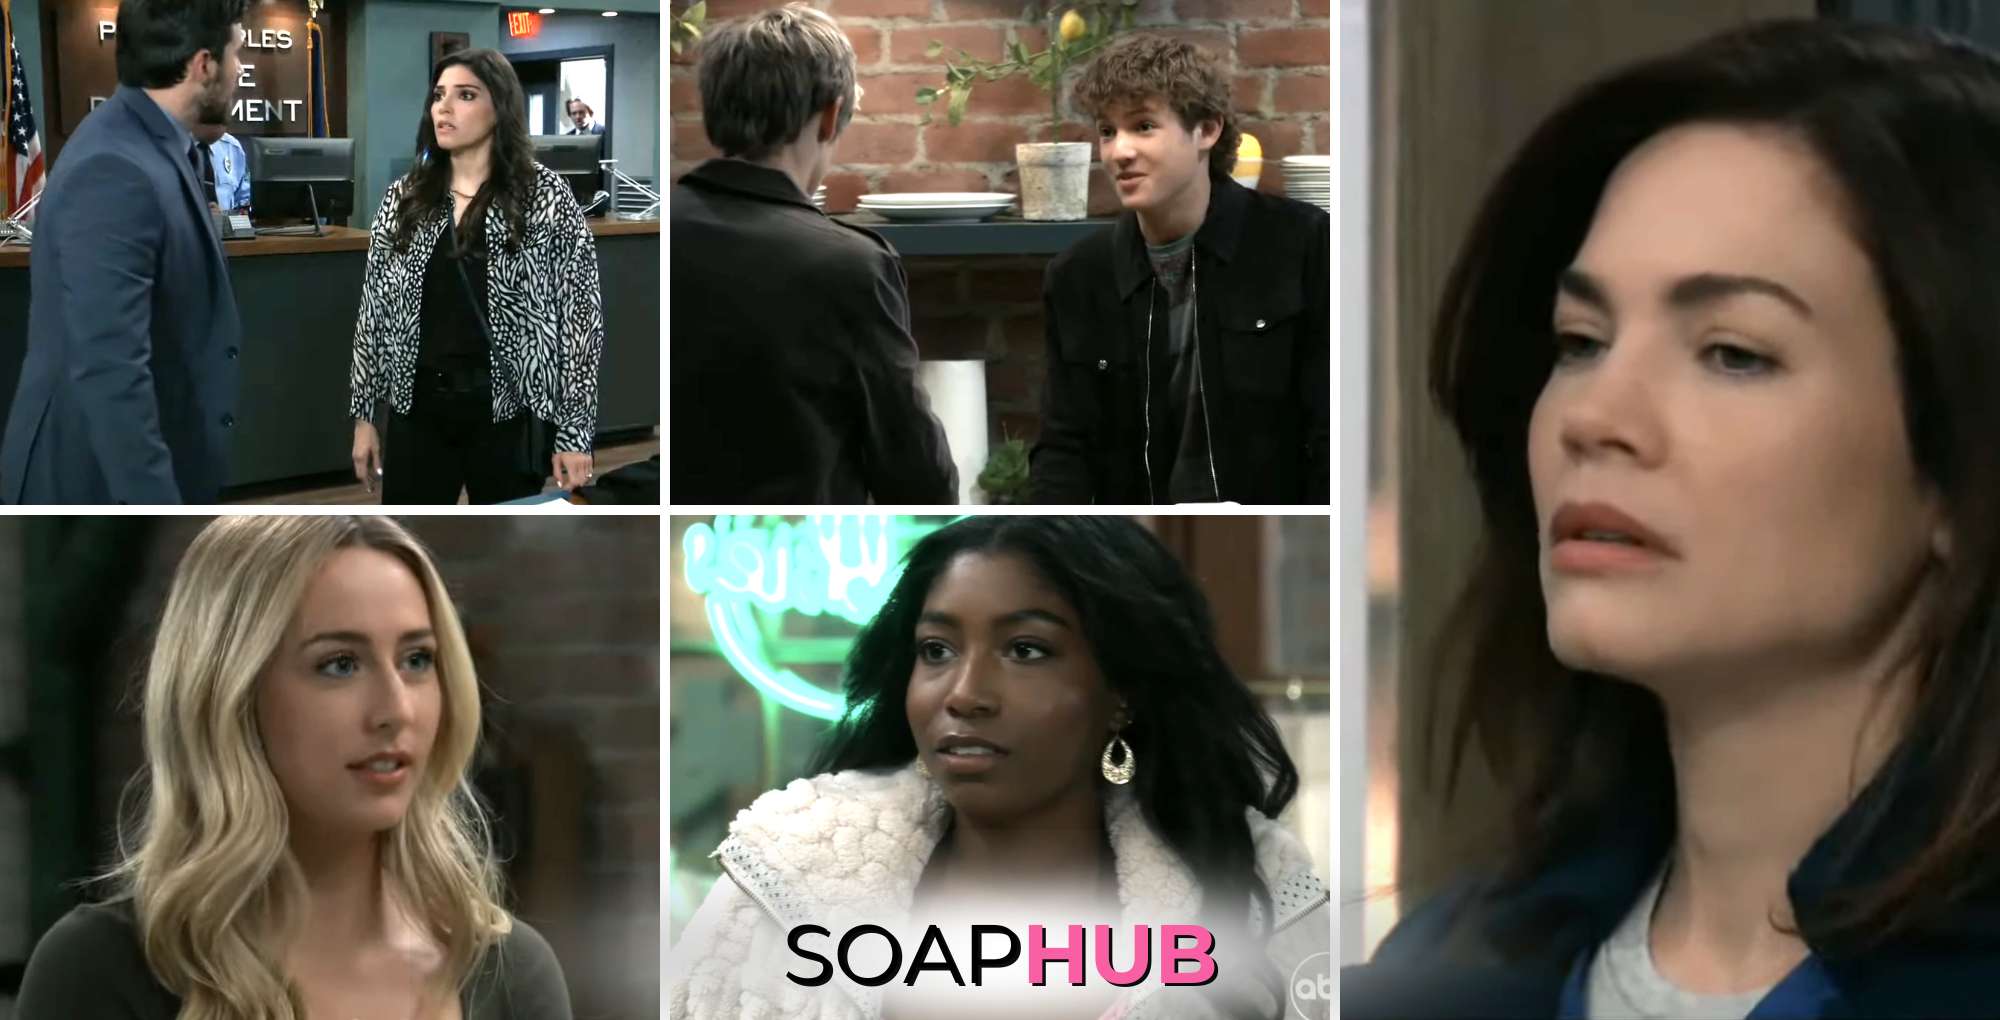 The General Hospital episode for Monday March 25 with Brook Lynn, Chase, Jess, Trina, Jake, Aiden, and Elizabeth.